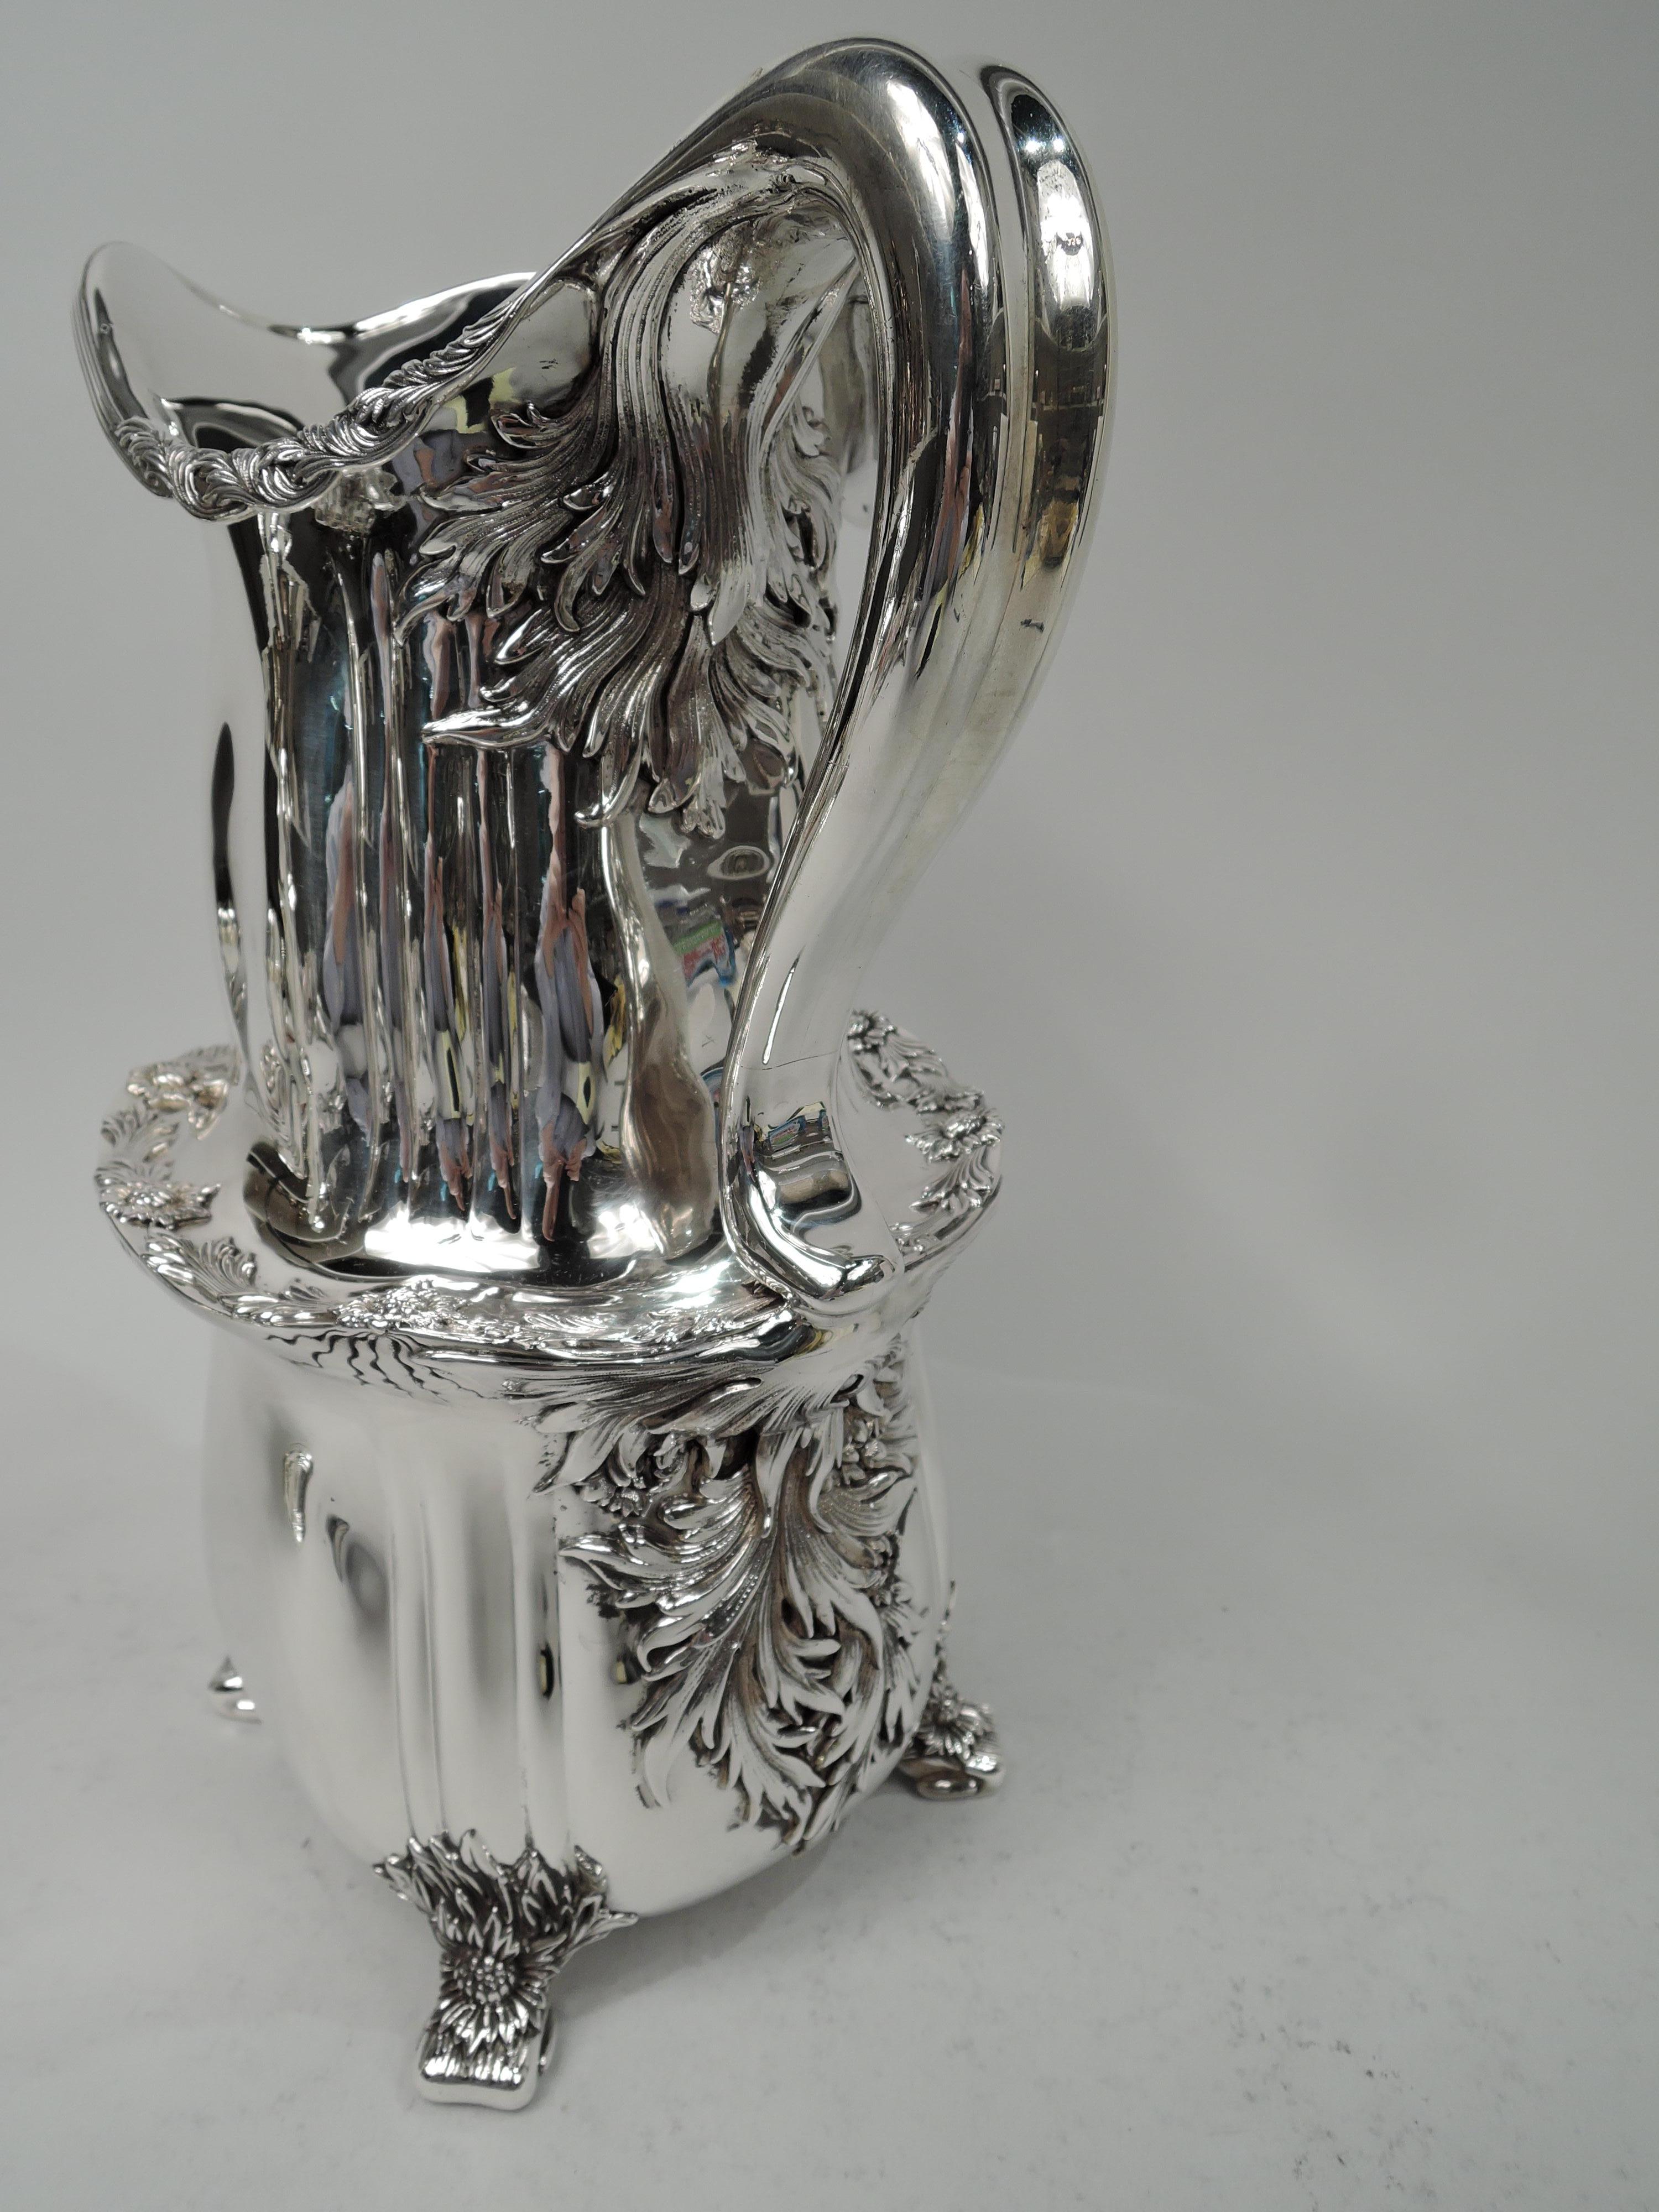 Rare Chrysanthemum sterling silver water pitcher. Made by Tiffany & Co. in New York. Double-gourd with irregular fluting; helmet mouth with leaves wrapped around reeded rim. Shoulder has applied leaf and flowerhead border with radiating squiggles